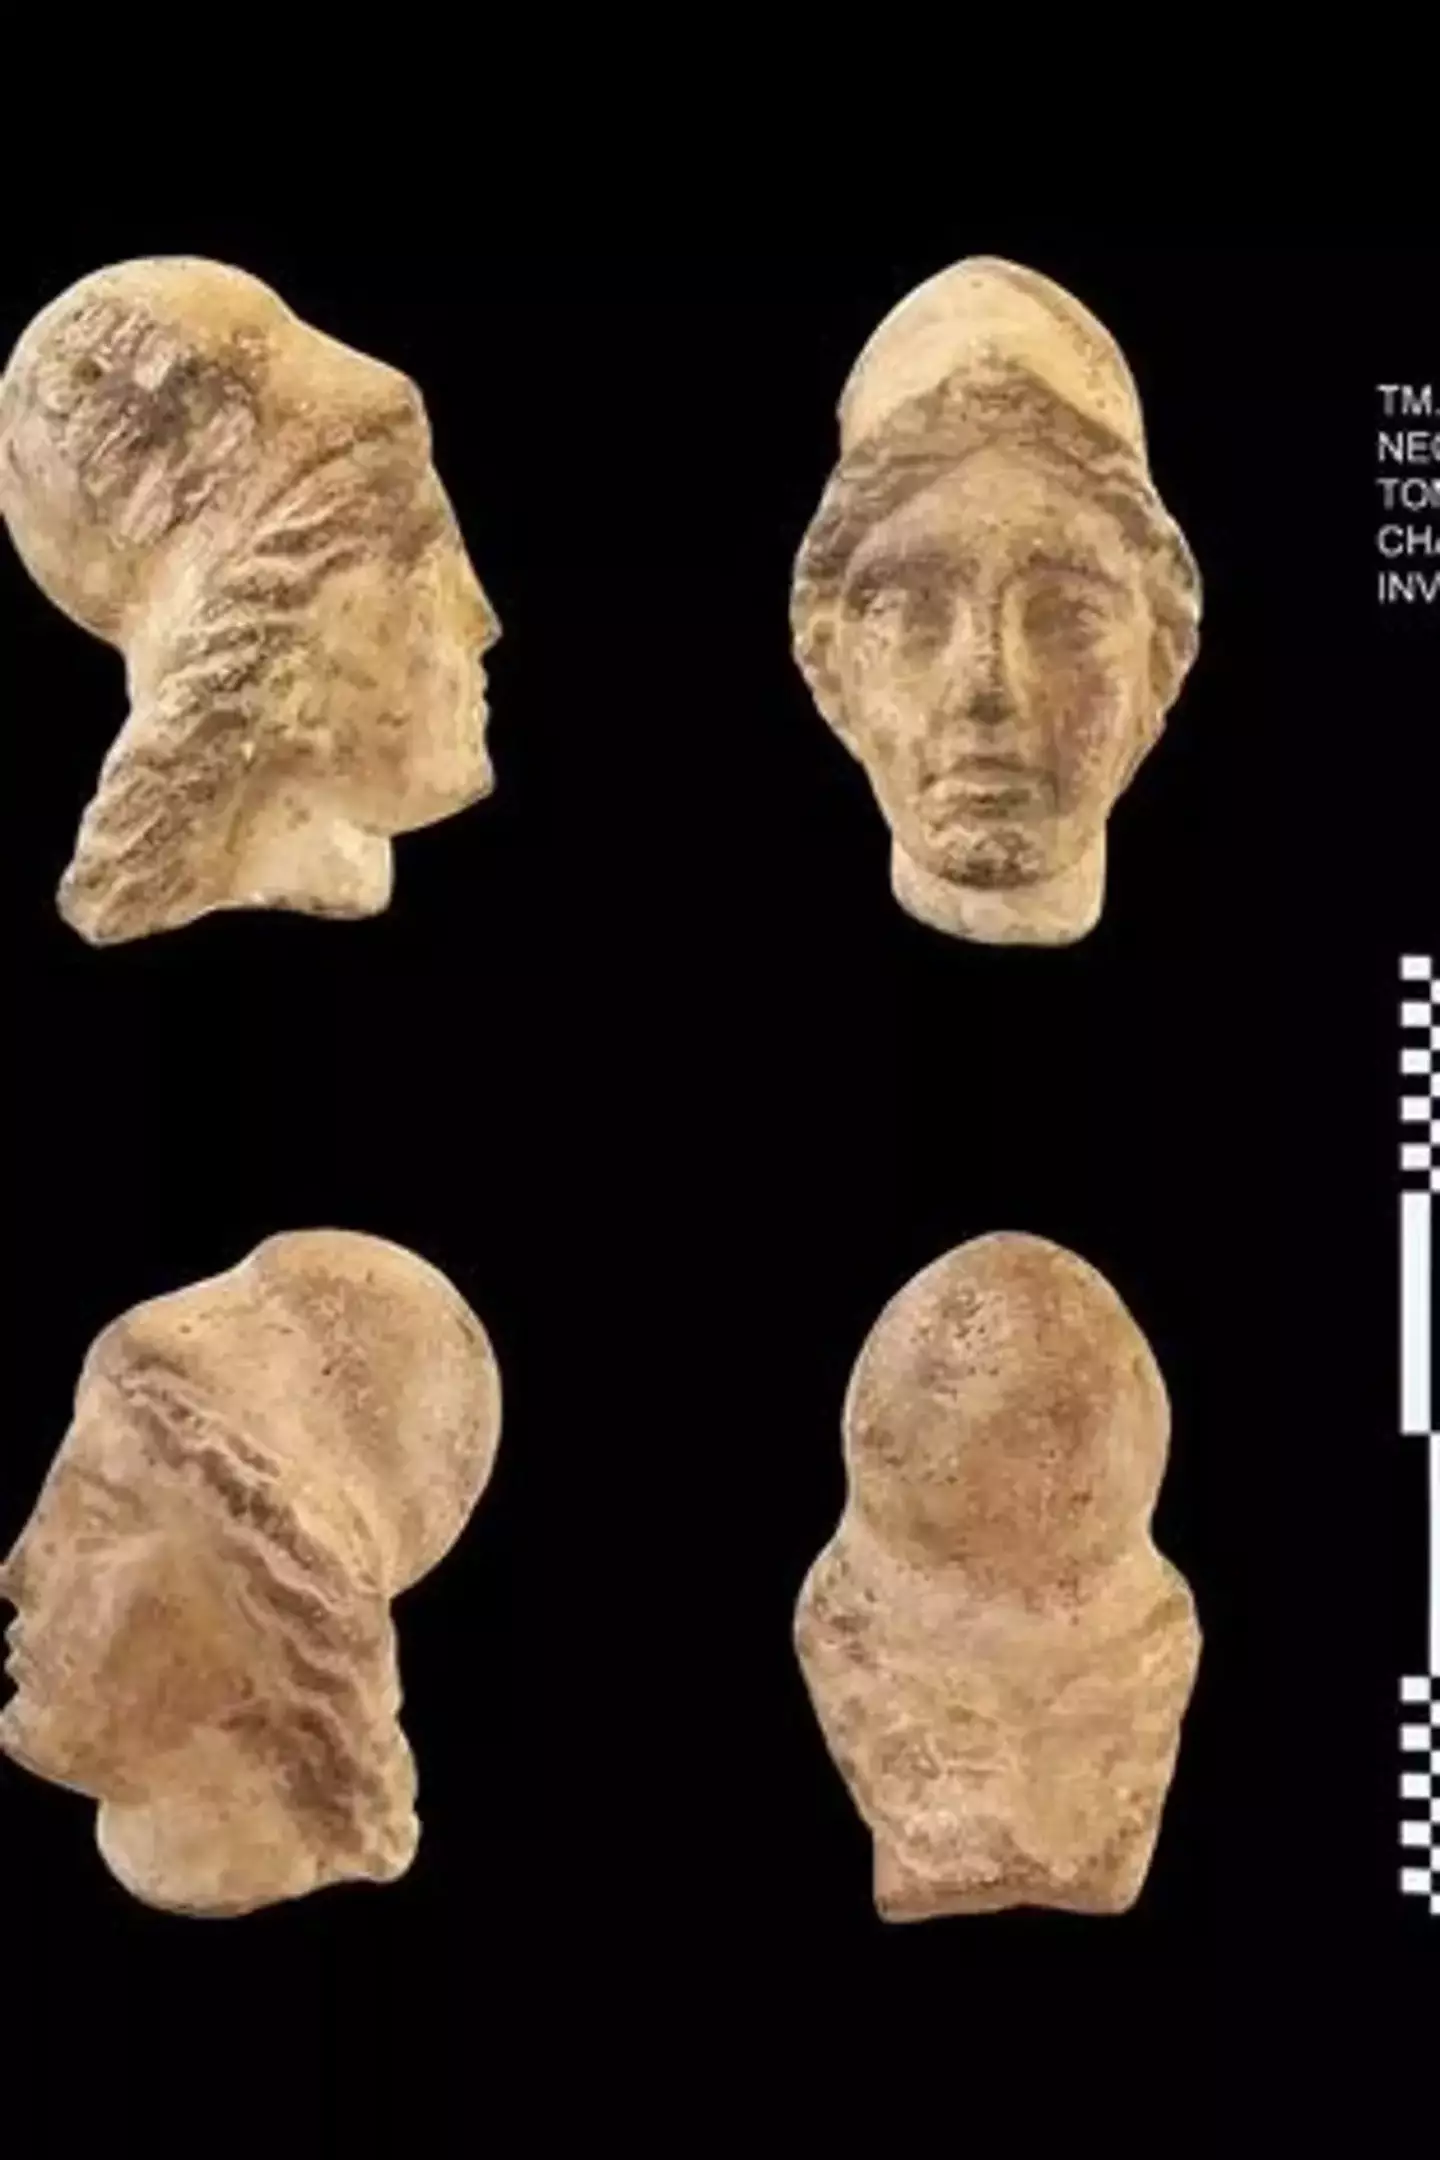 Statues and coins were also discovered at the site.